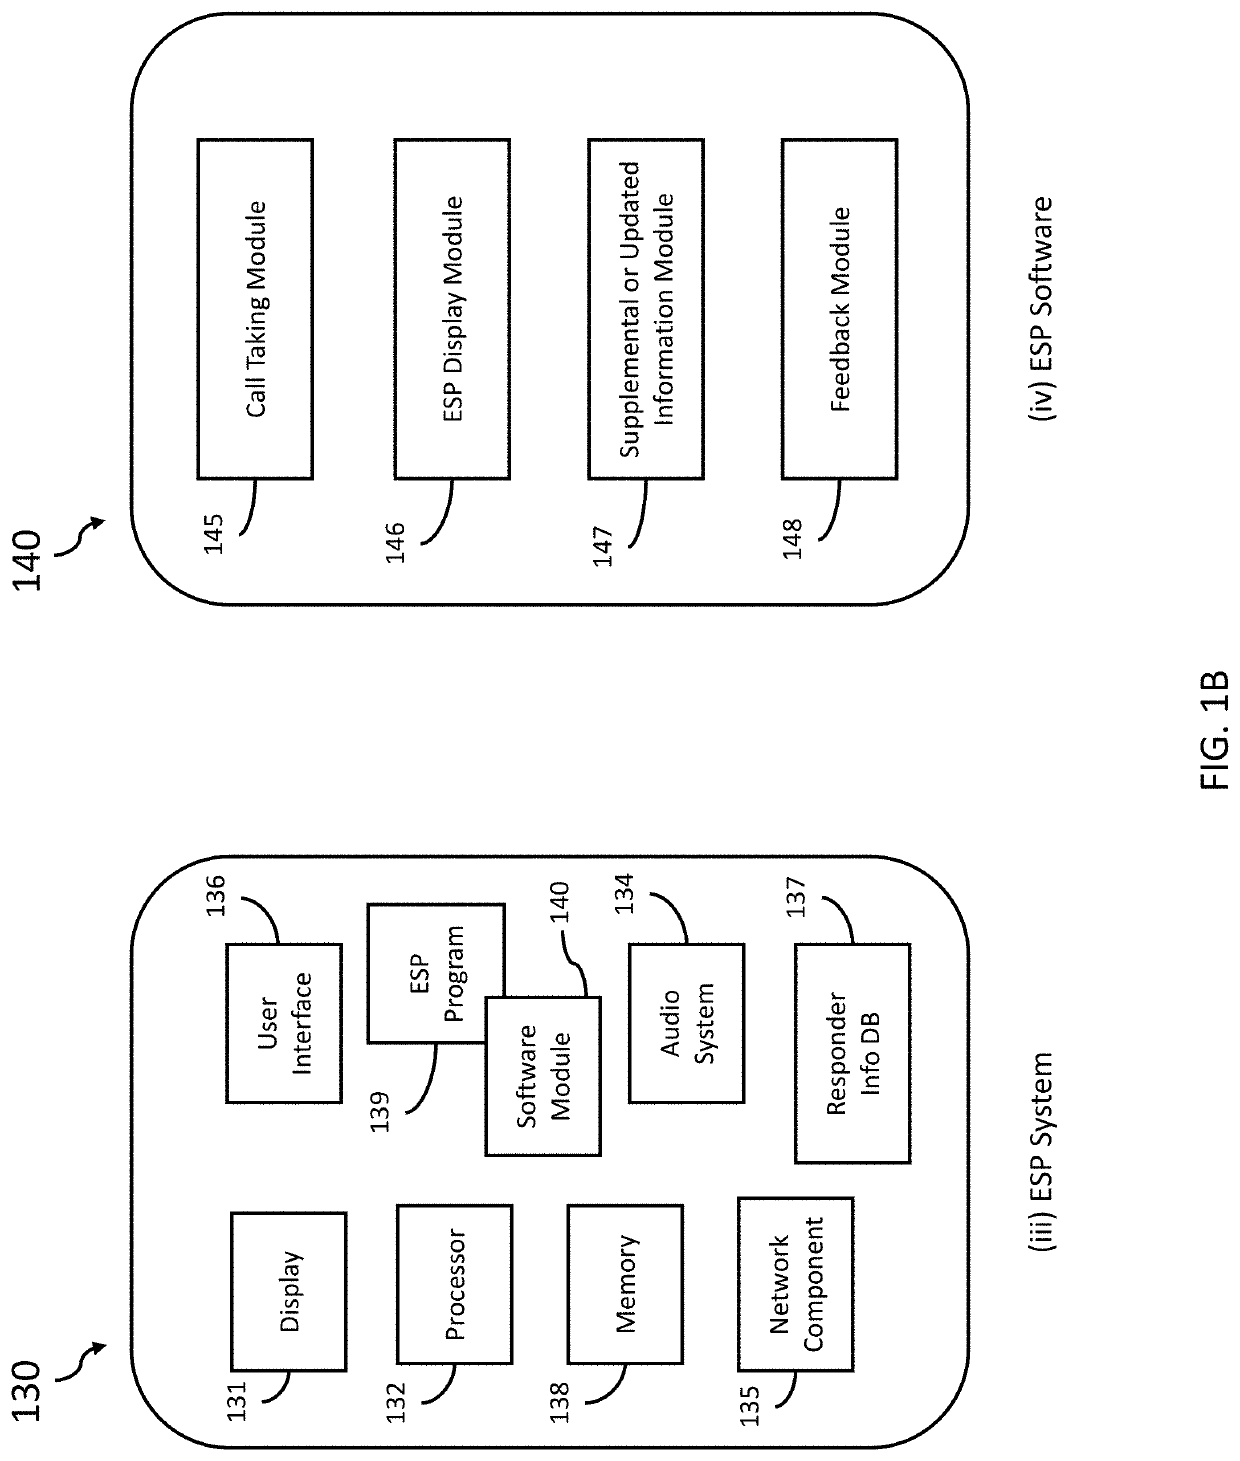 Systems and methods for automated emergency response